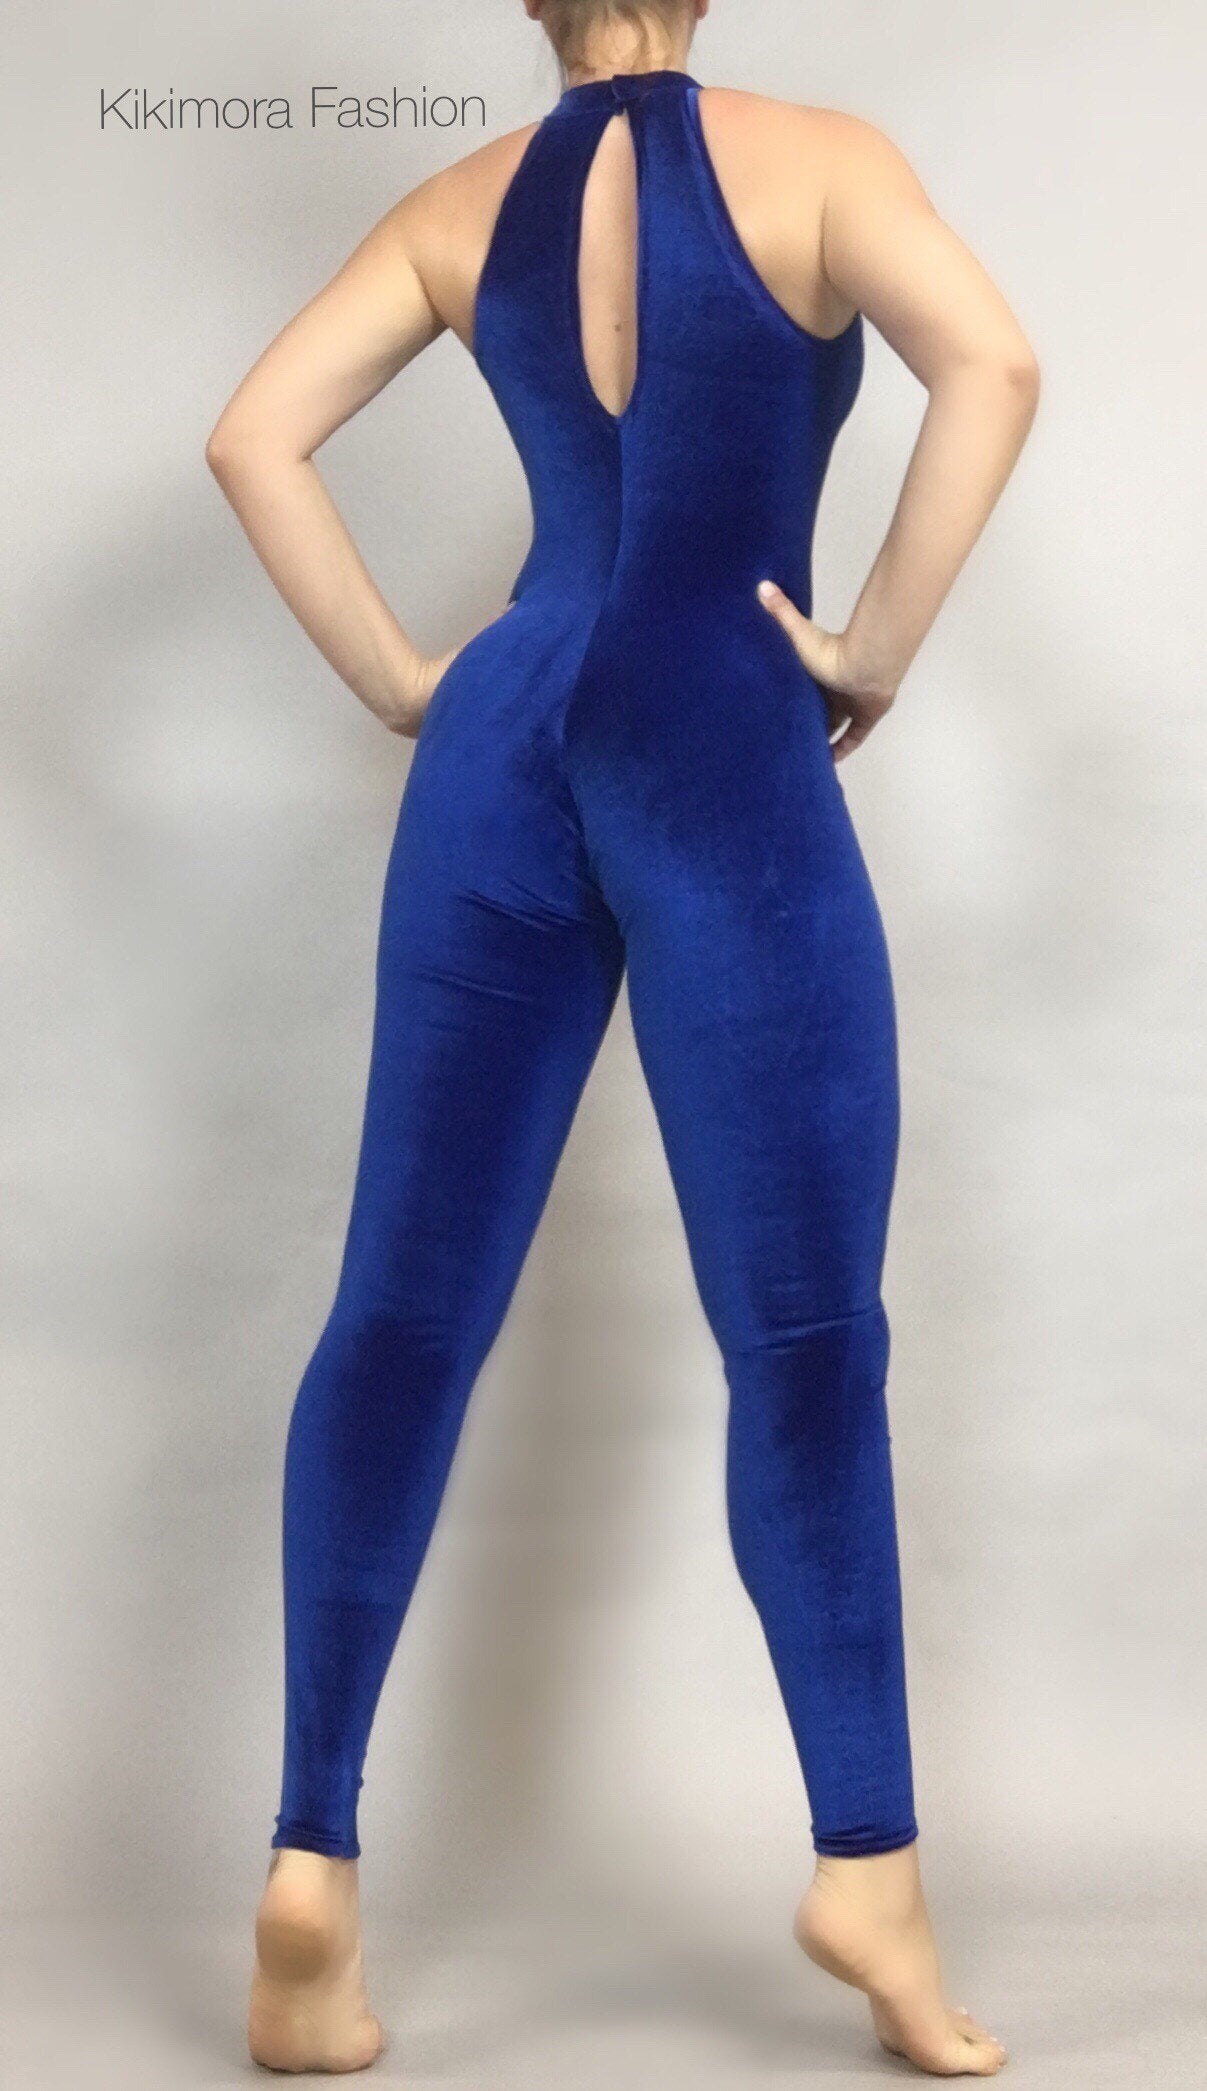 Velvet Bodysuit for Women, Catsuit Costume for Gymnasts, Dancers, and Fitness Performers